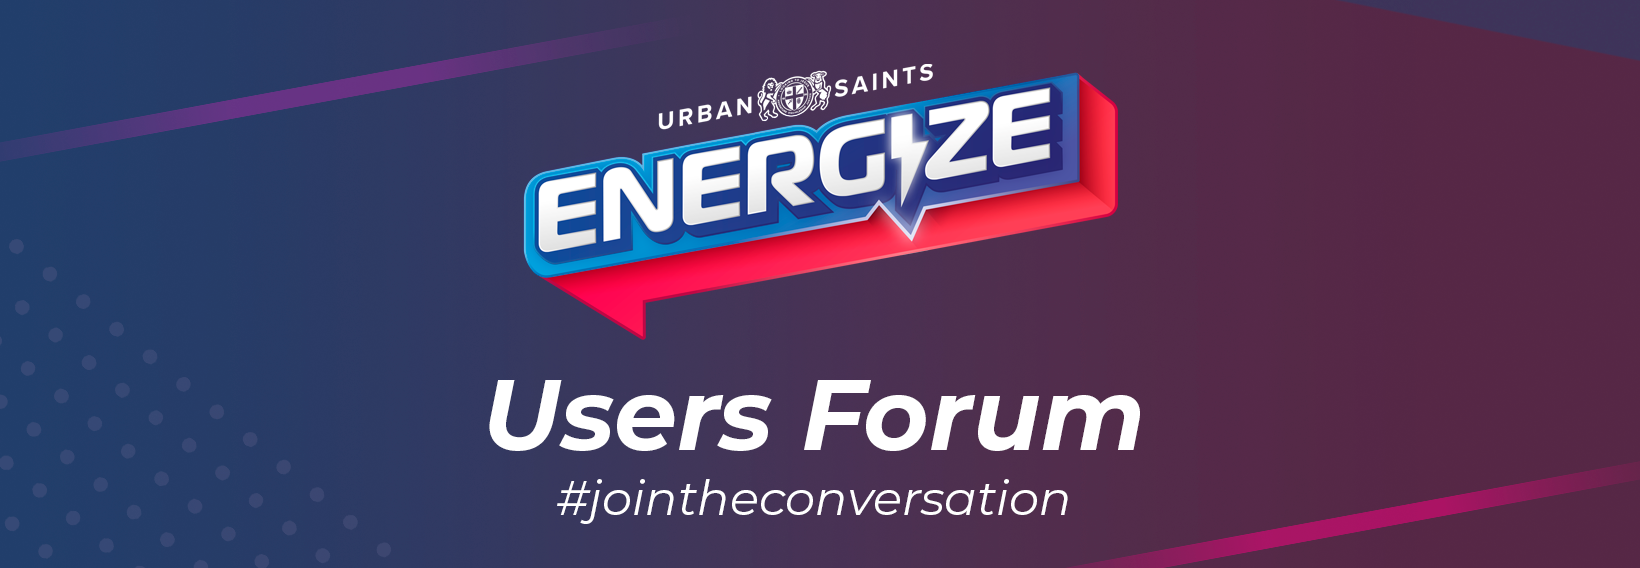 Energize Users Forum